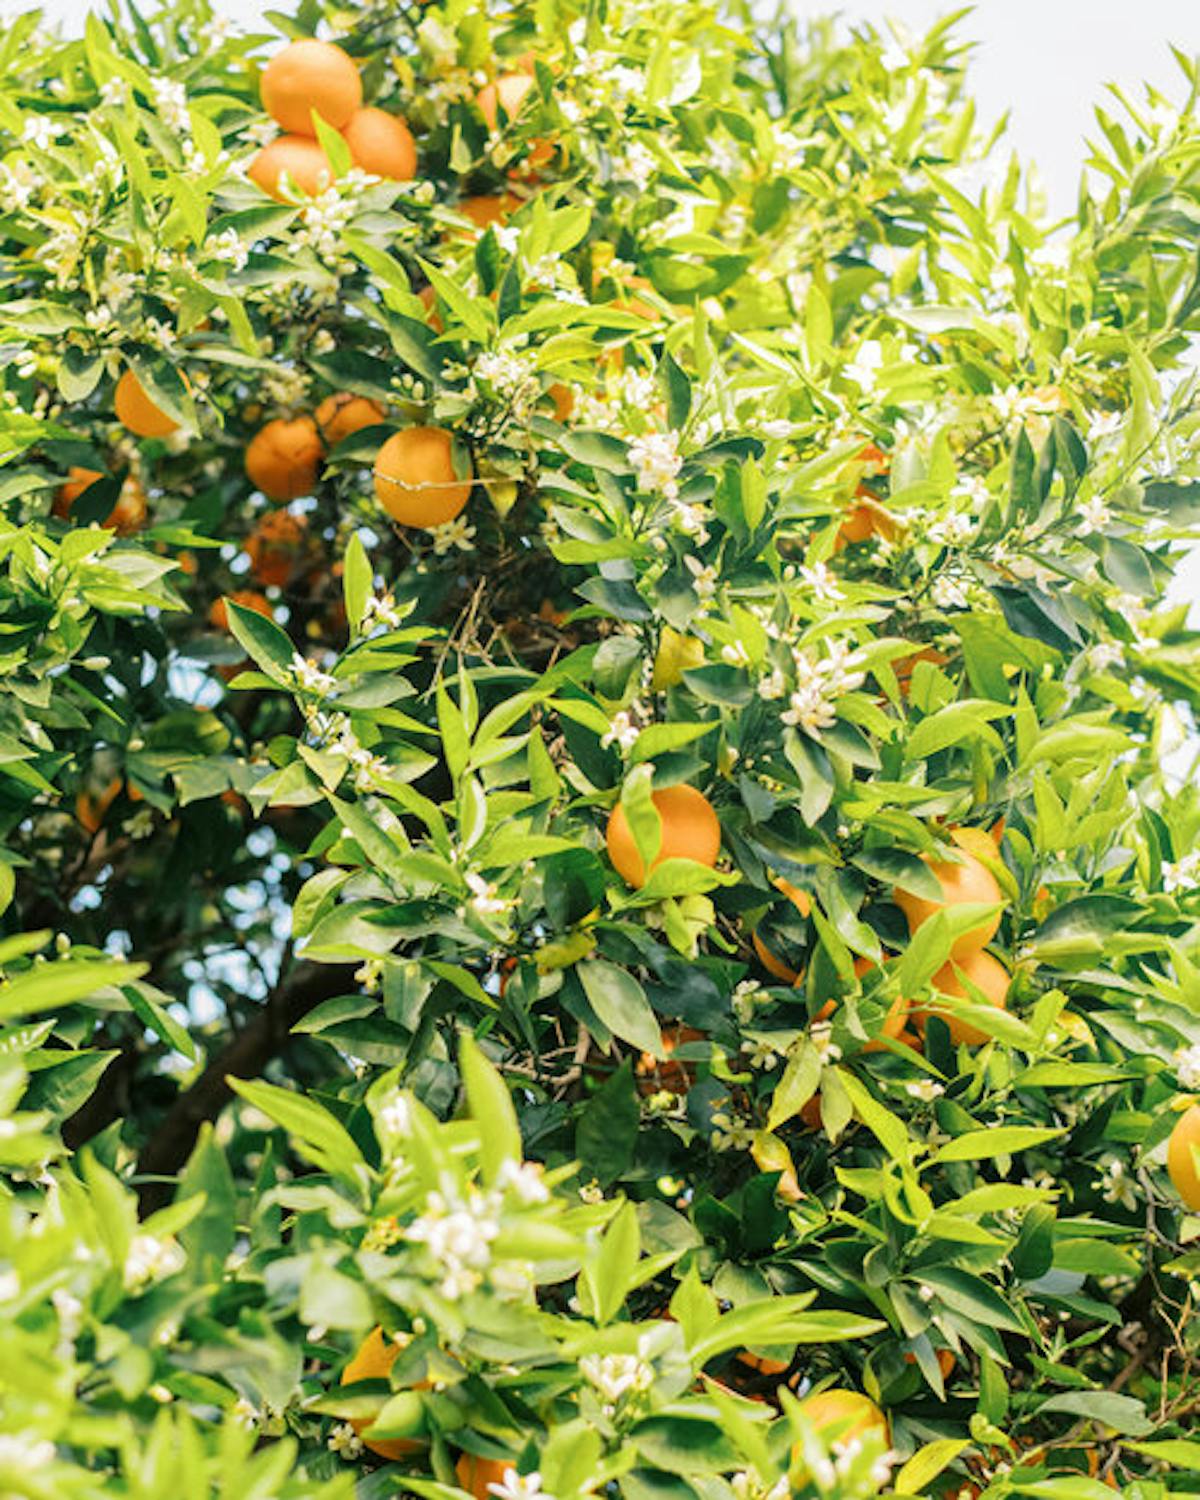 a group of oranges in a garden